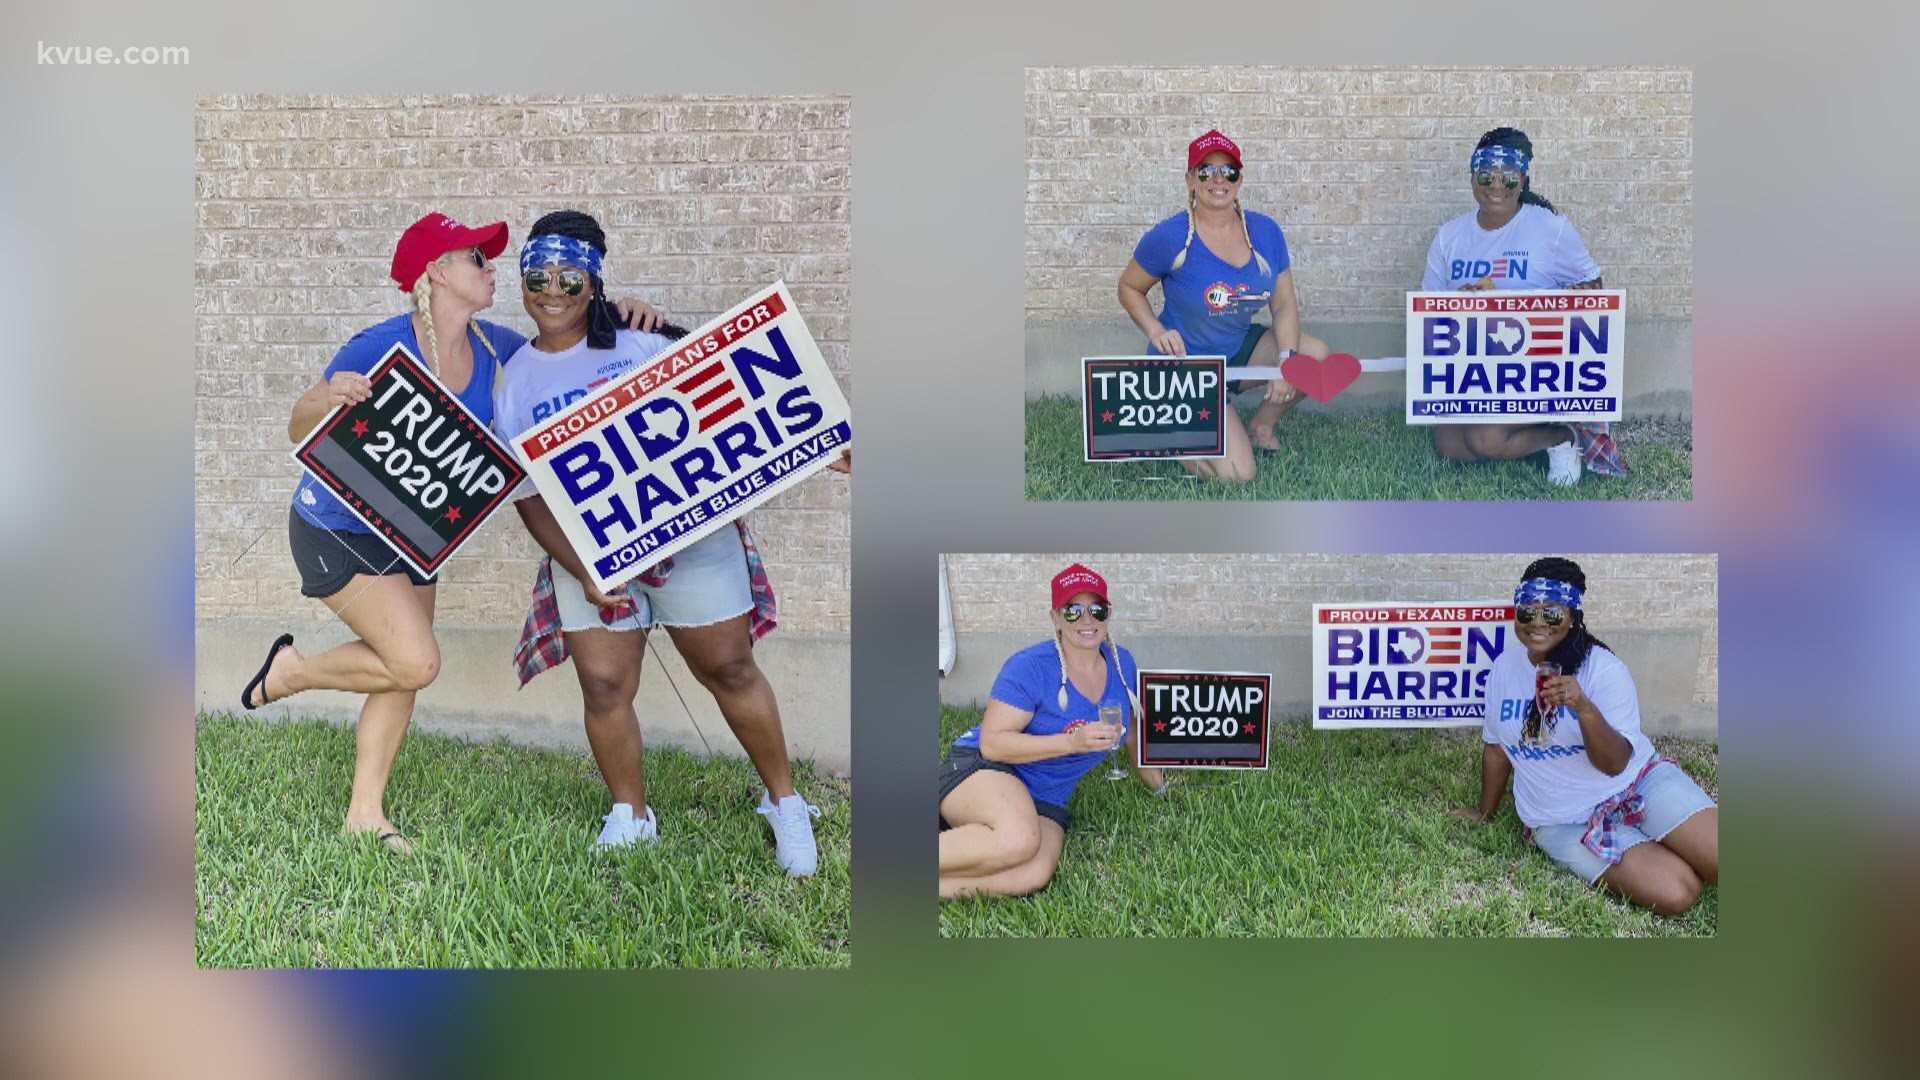 After seeing their Cedar Park neighbors destroy each other's political signs, the duo made a Facebook post encouraging all parties to respect each other.